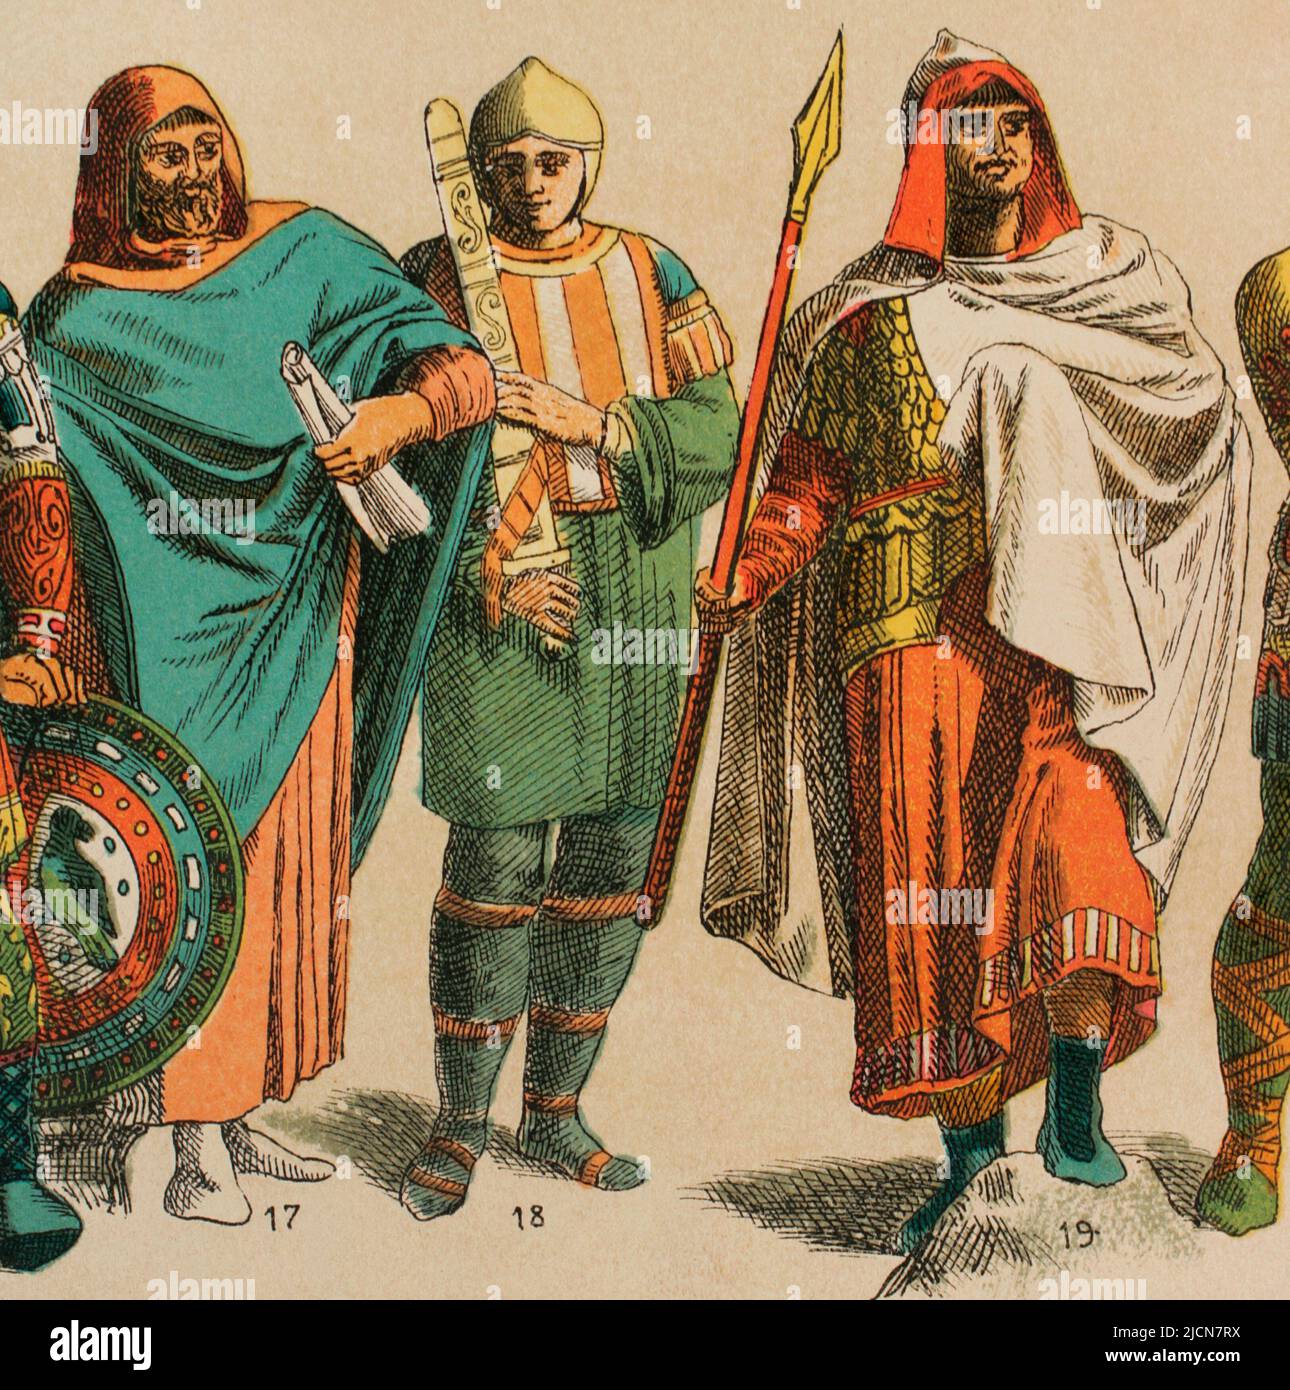 Byzantines (700-1000). From left to right, 17: Writer's costume. Paenula, 18: Byzantine soldier, 19: Warrior costume. Paenula. Chromolithography. 'Historia Universal' (Universal History), by César Cantú. Volume IV. Published in Barcelona, 1881. Stock Photo